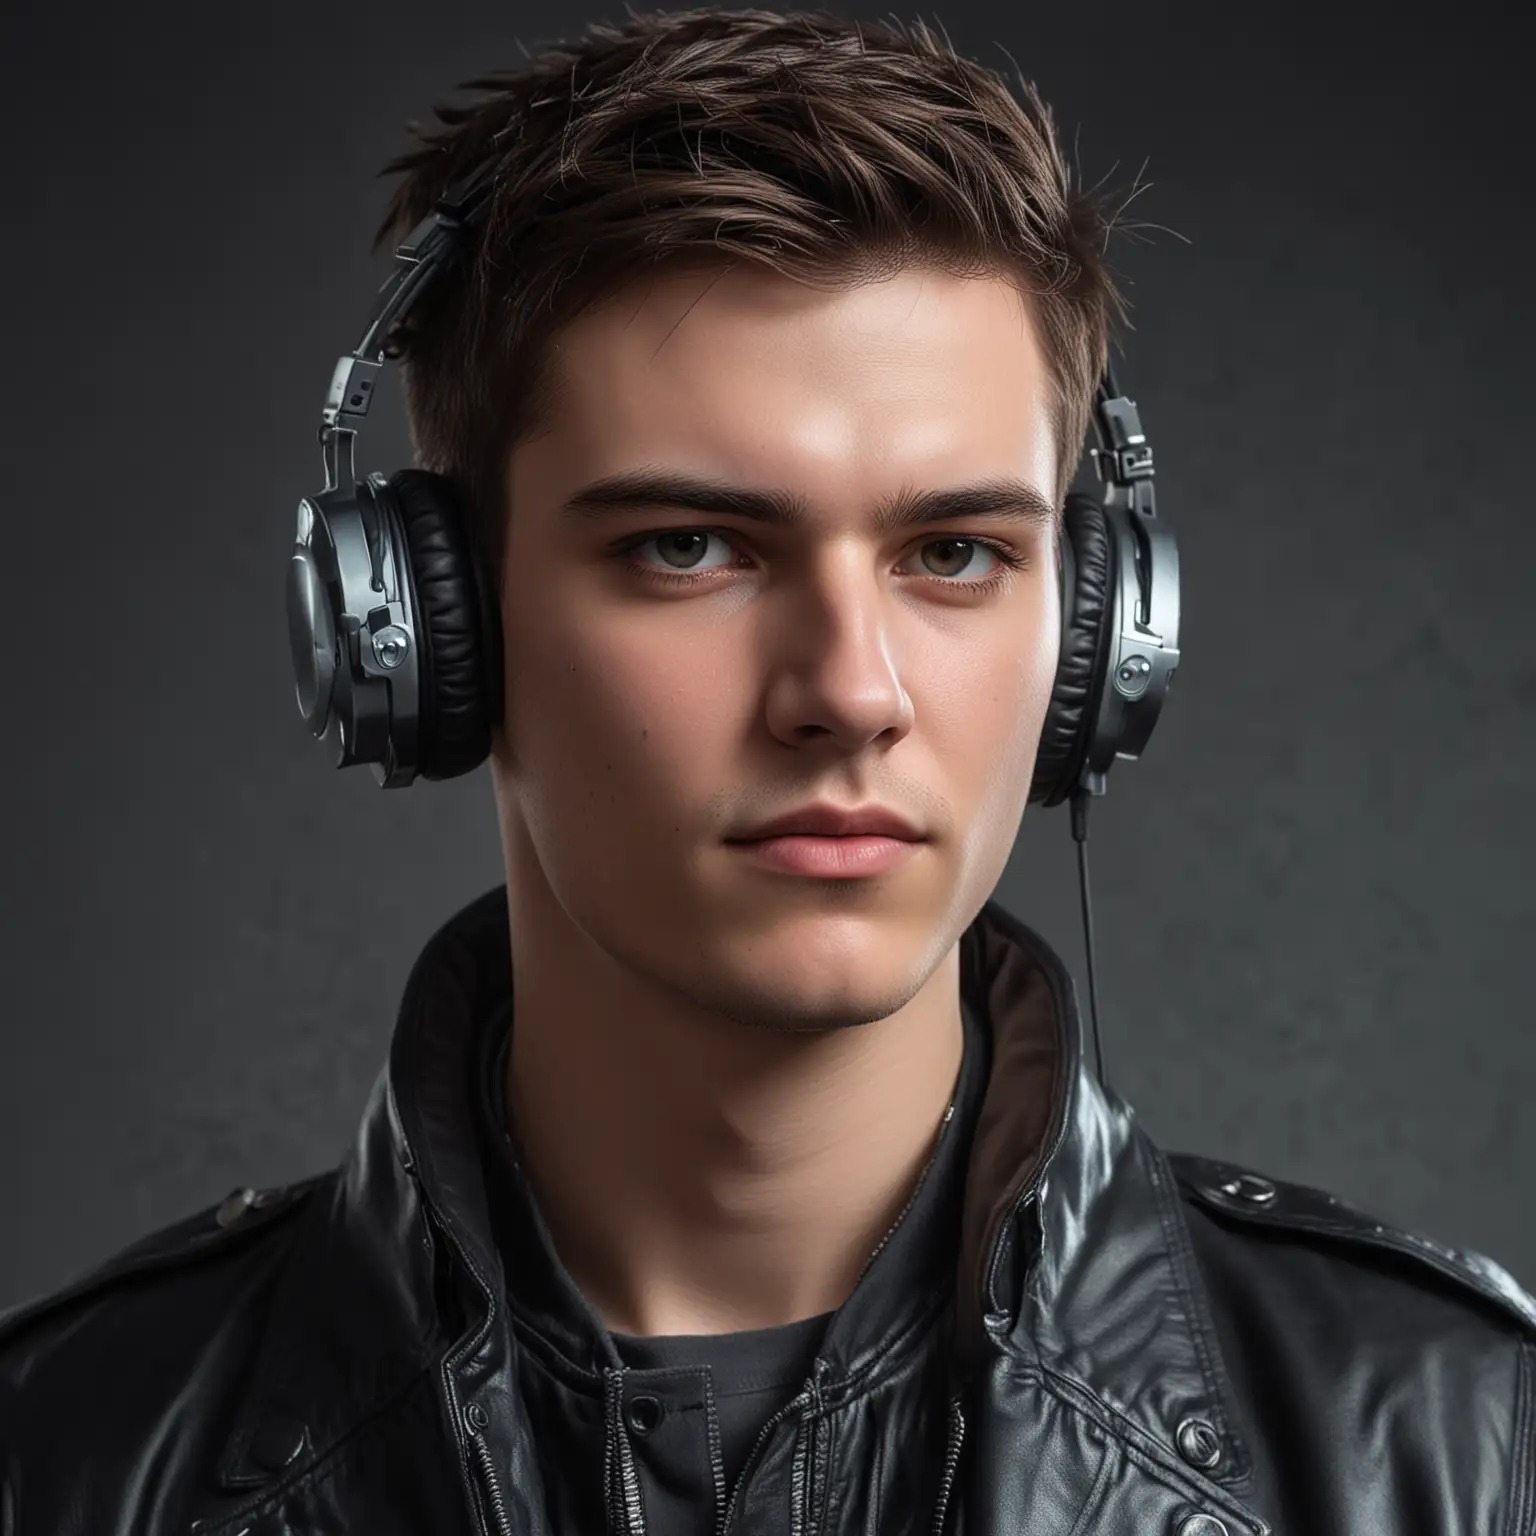 a handsome American youth wearing a black leather jacket, a latest Sony headphone around his neck, looking like a cyberpunk style, he is playing games, close-up of the face